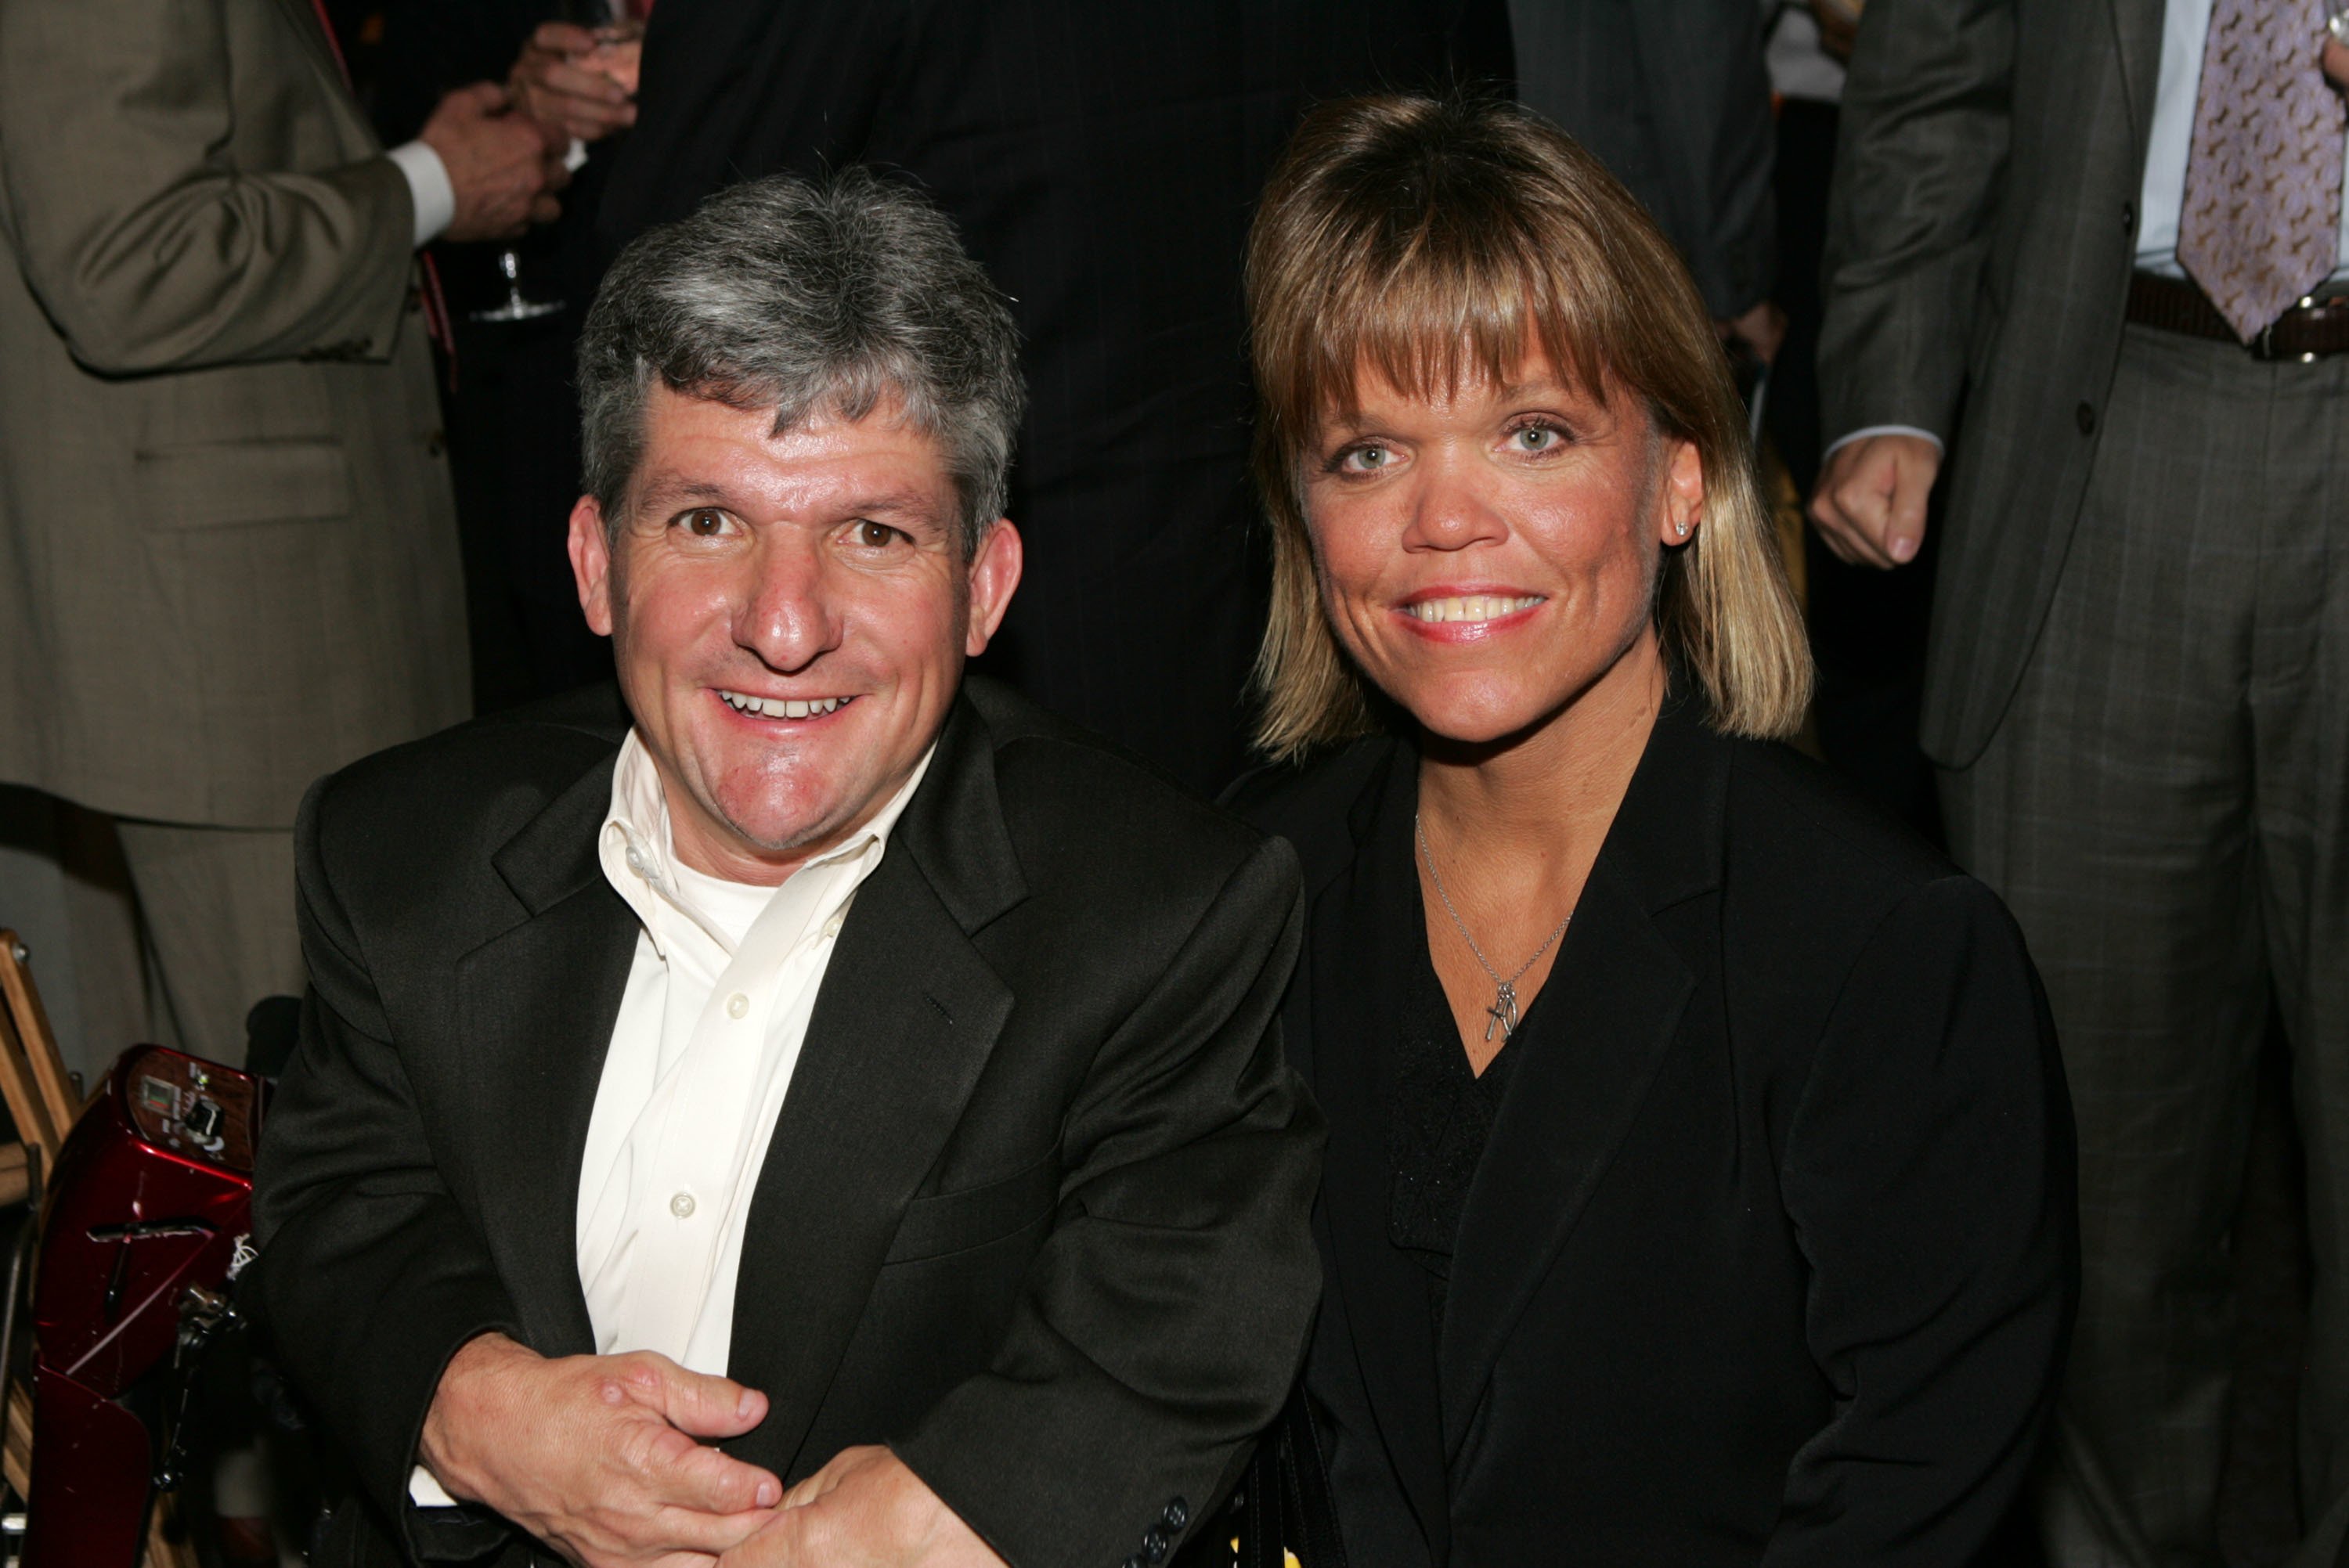 Matt and Amy Roloff at the Discovery Upfront Presentation NY - Talent Images on April 23, 2008, in New York City| Photo :Getty Images